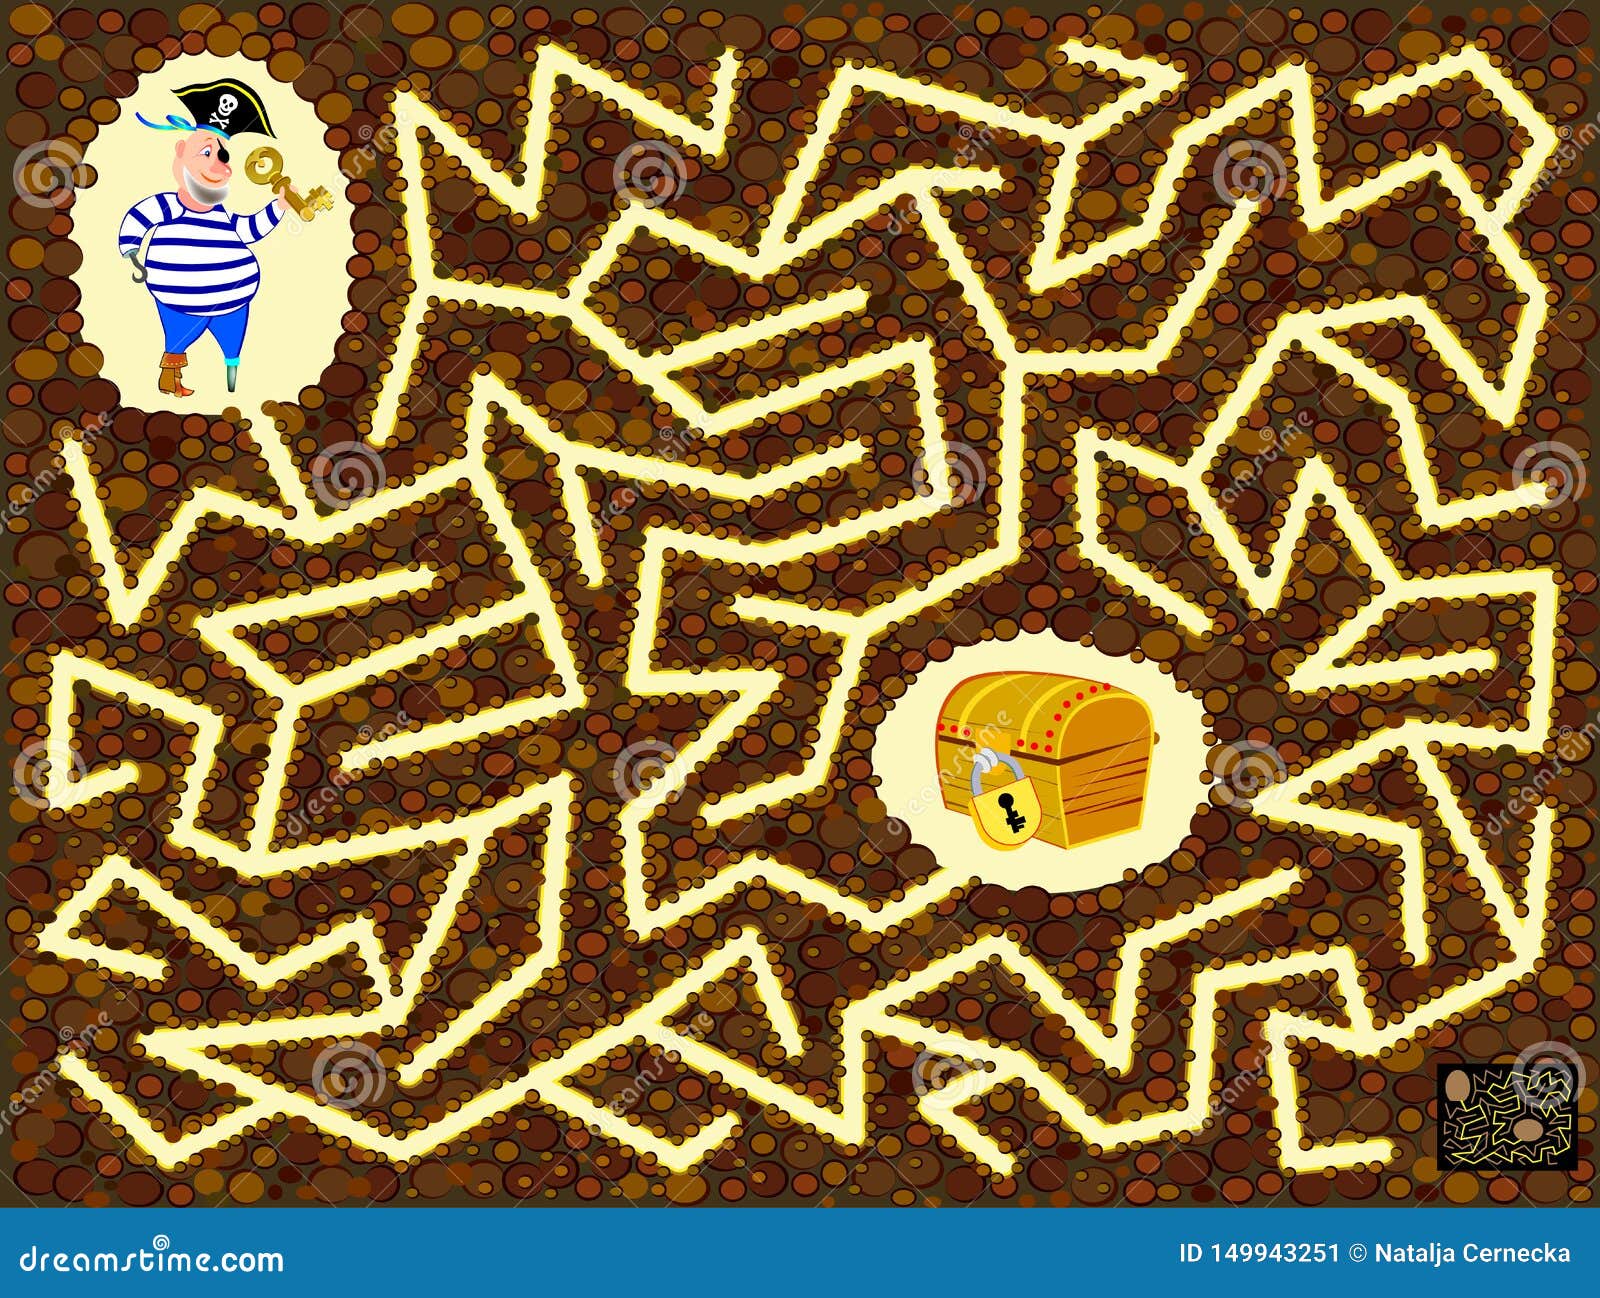 logical puzzle game with labyrinth for children and adults. help the pirate find the way till treasure chest.